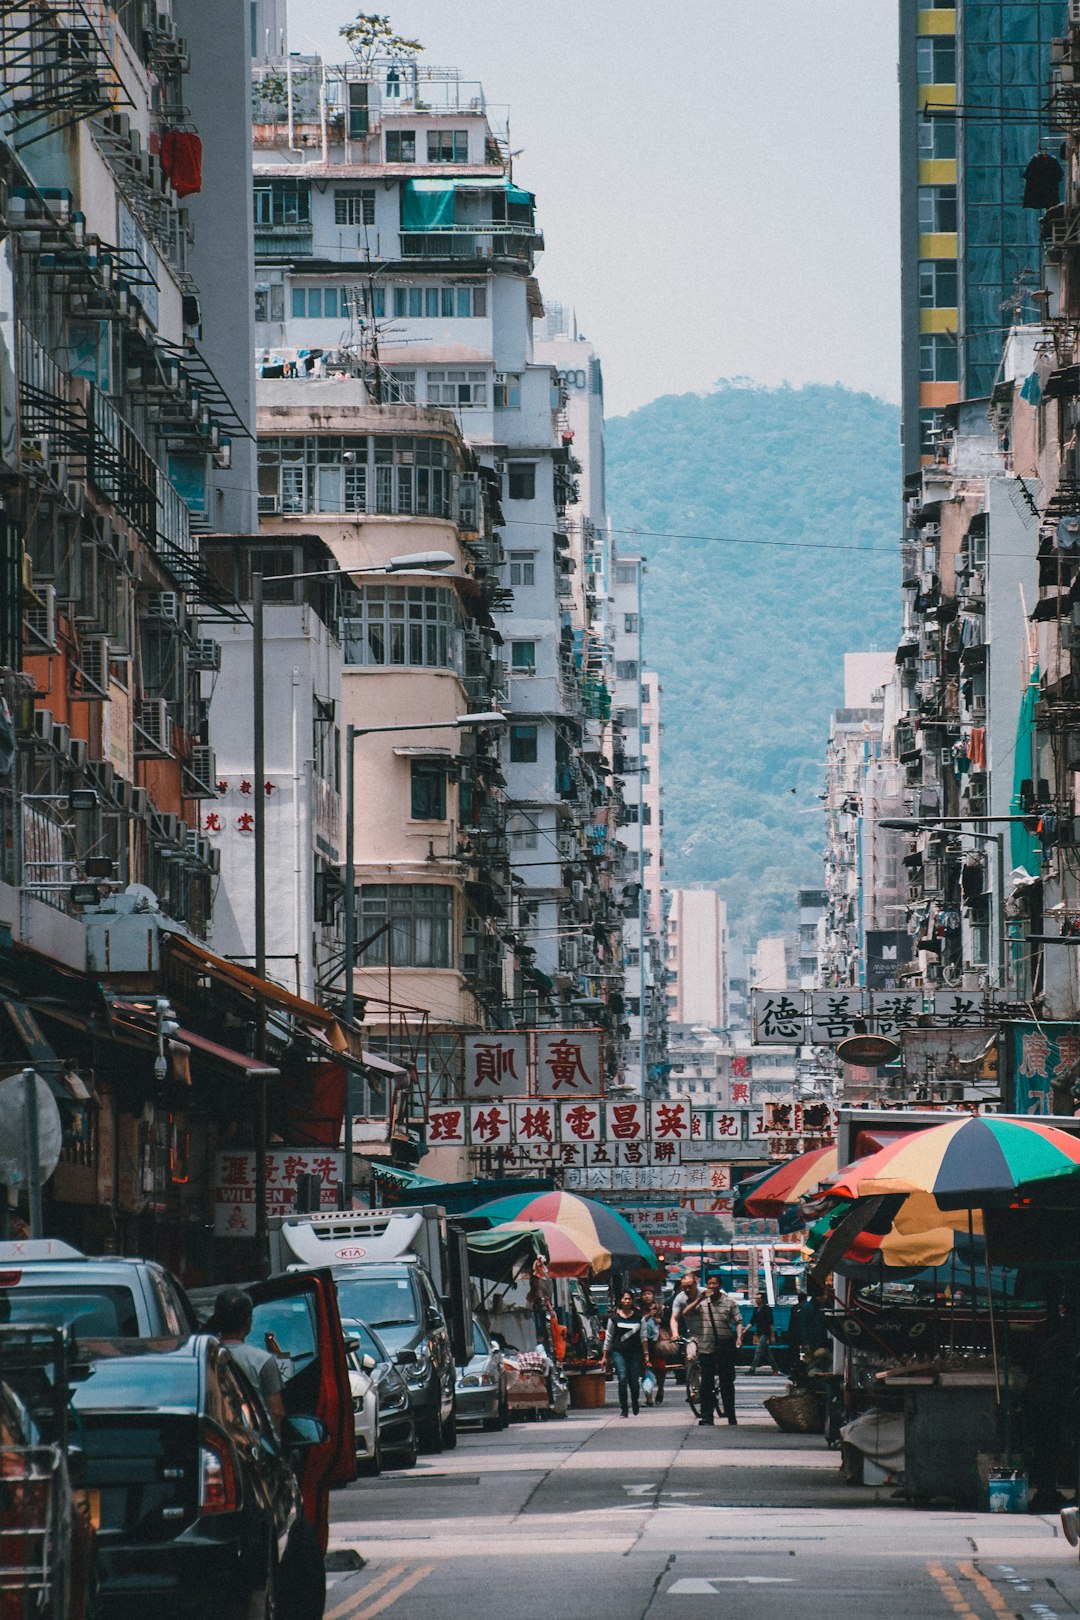 Travel Tips and Stories of Yau Ma Tei in Hong Kong